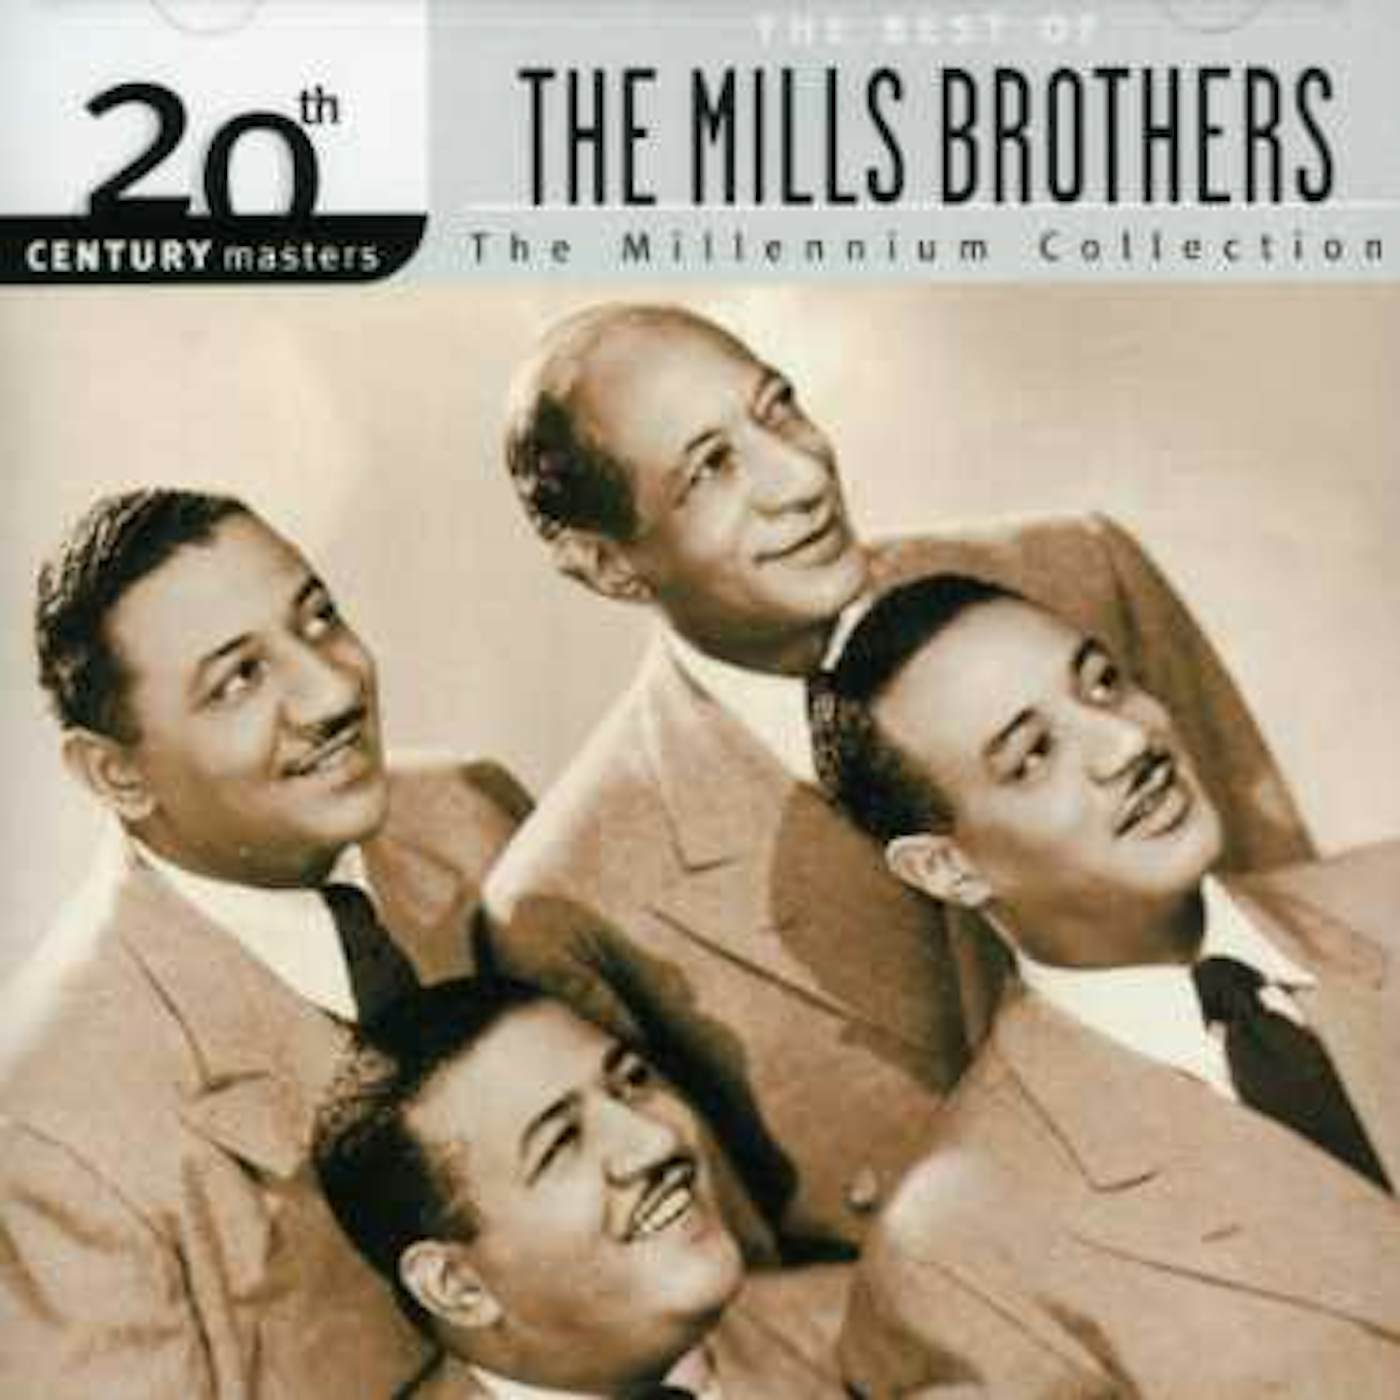 The Mills Brothers 20TH CENTURY MASTERS CD